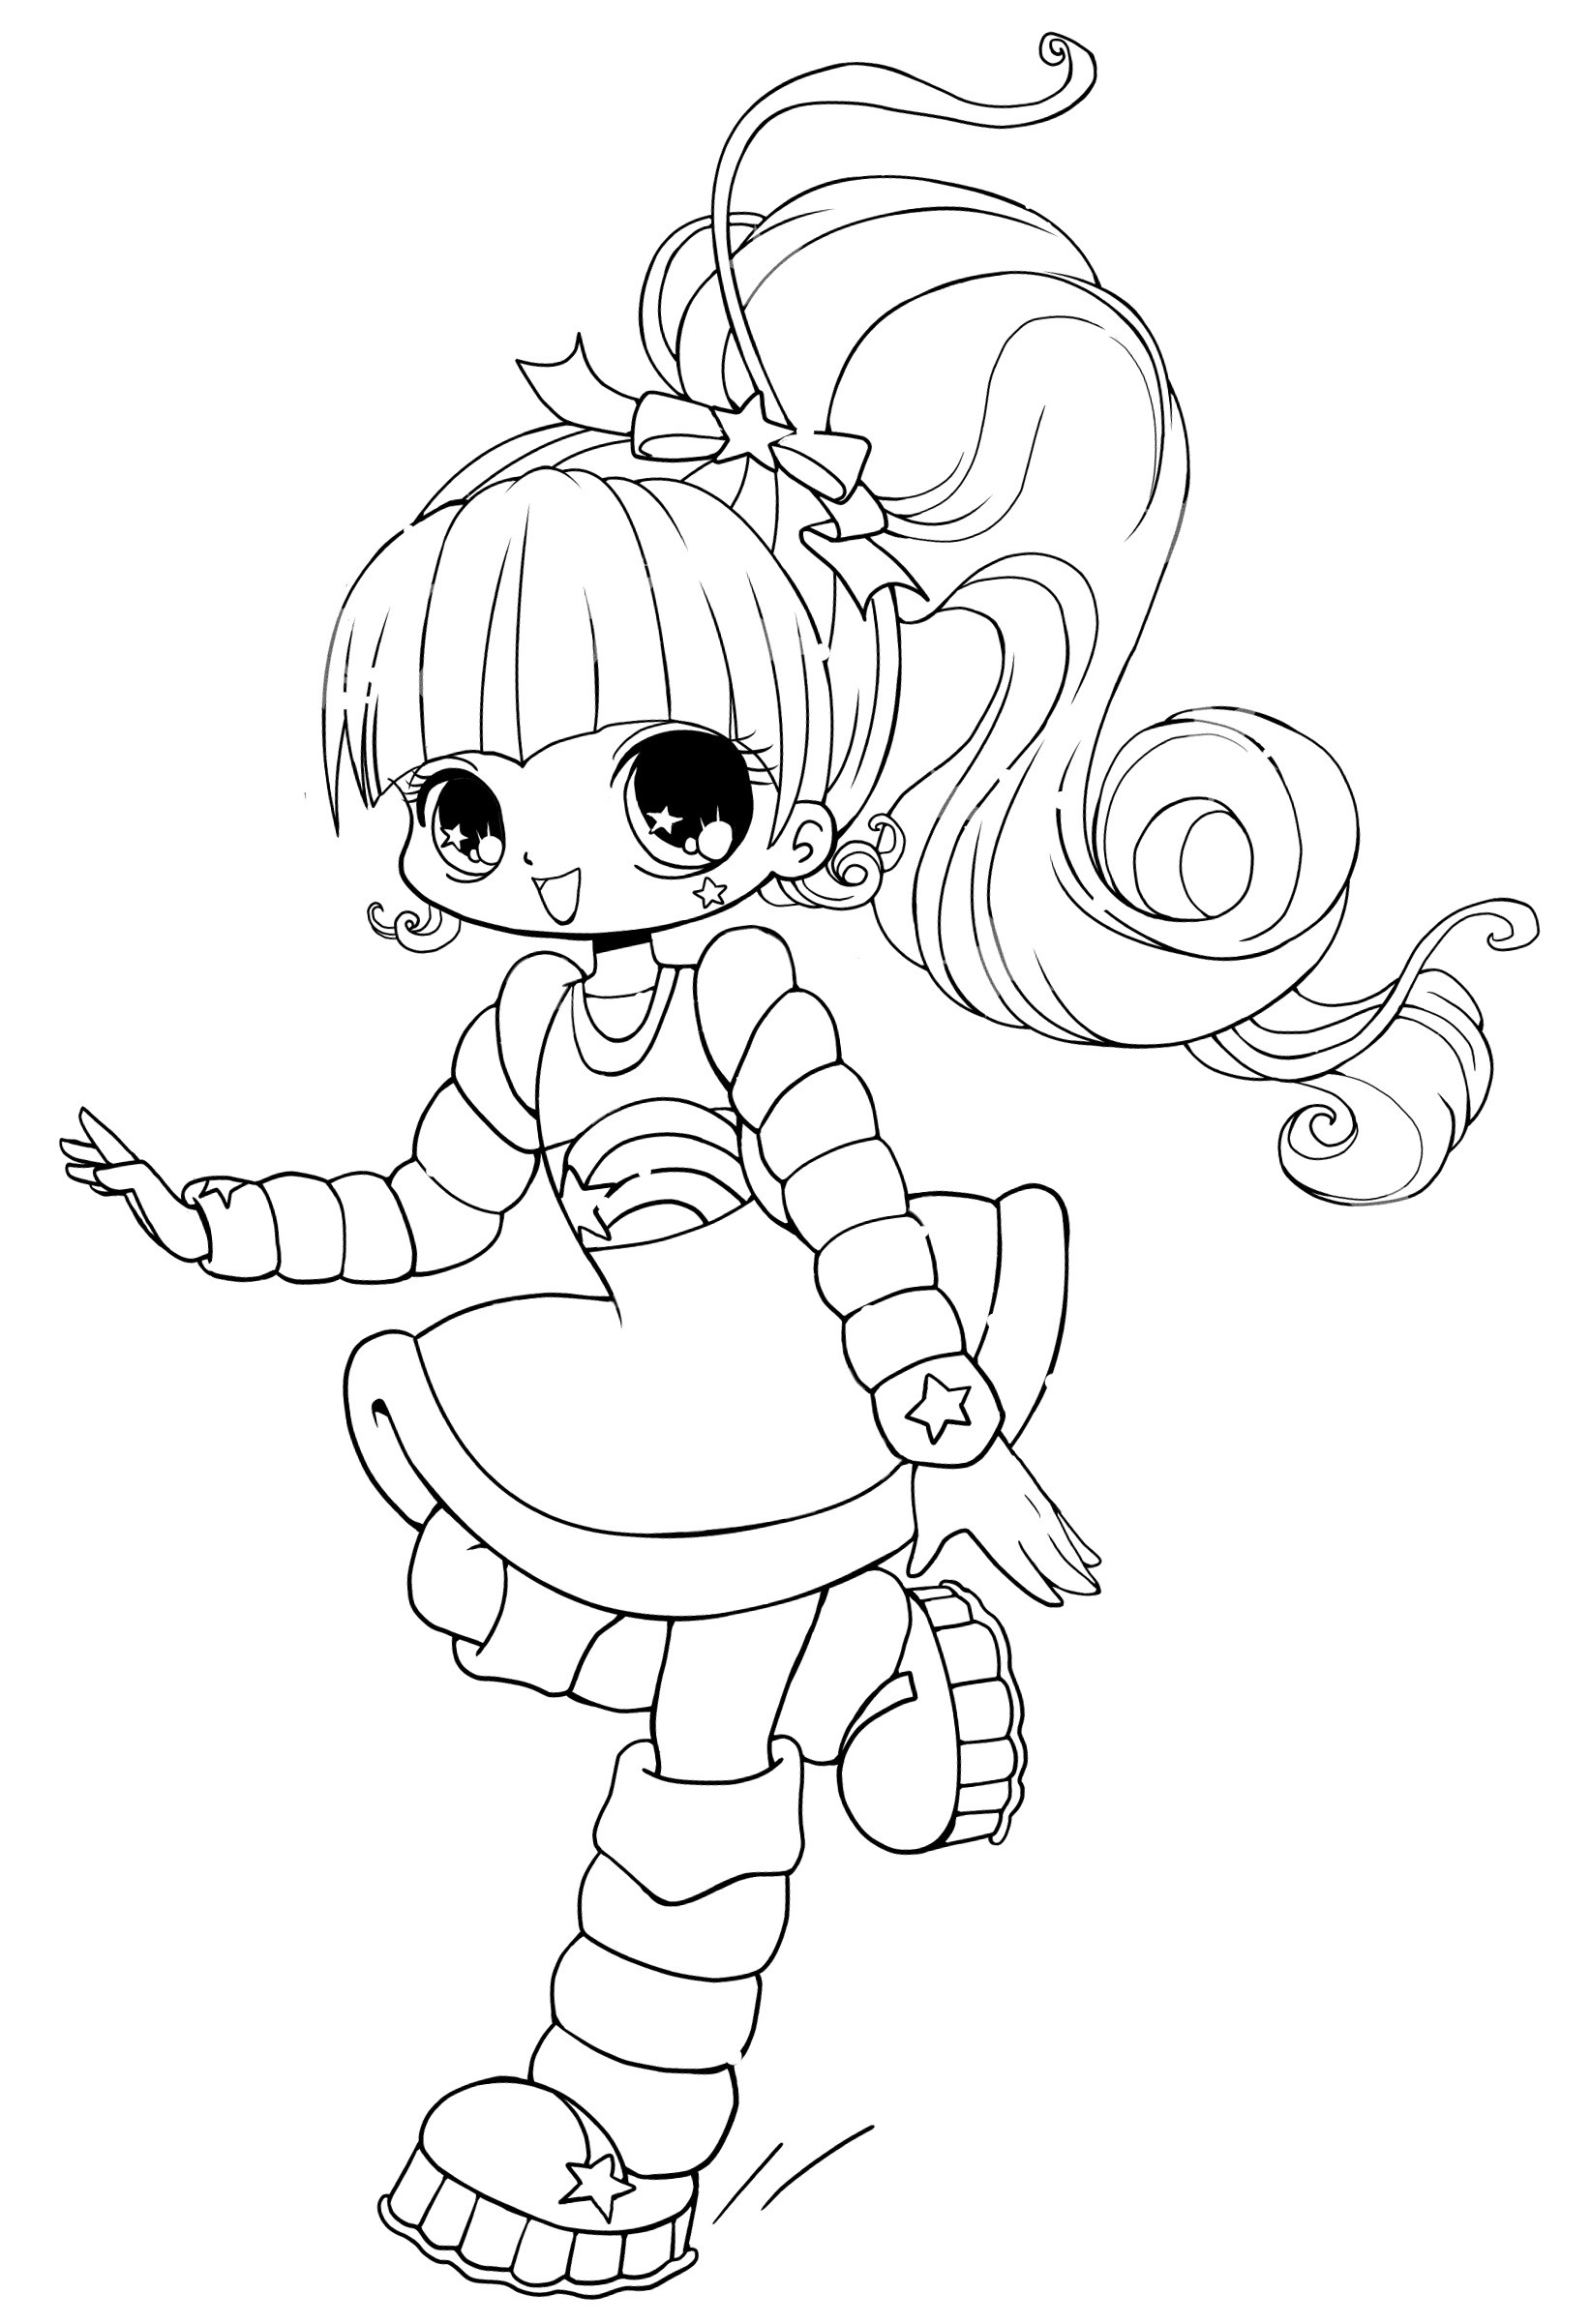 Cute Coloring Pages Of Girls
 1000 images about dessin a colorier 12 on Pinterest